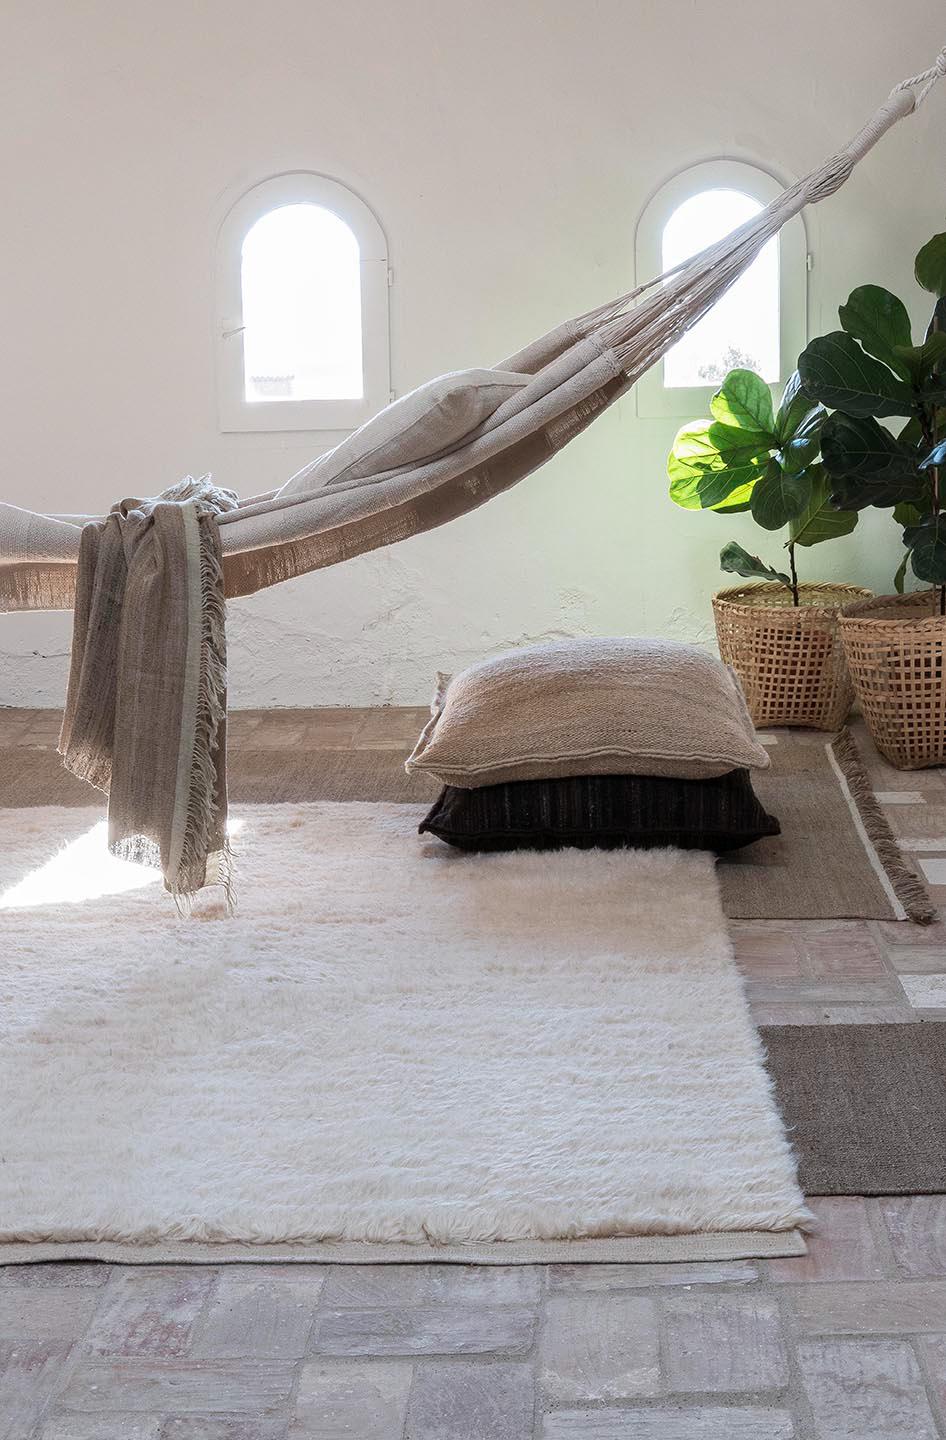 Wellbeing is an organism of comforting textile products that support the human experience. All the items focus on tactility, materiality, craft and quality. They add warmth, softness and comfort to indoor environments, and a connection to the